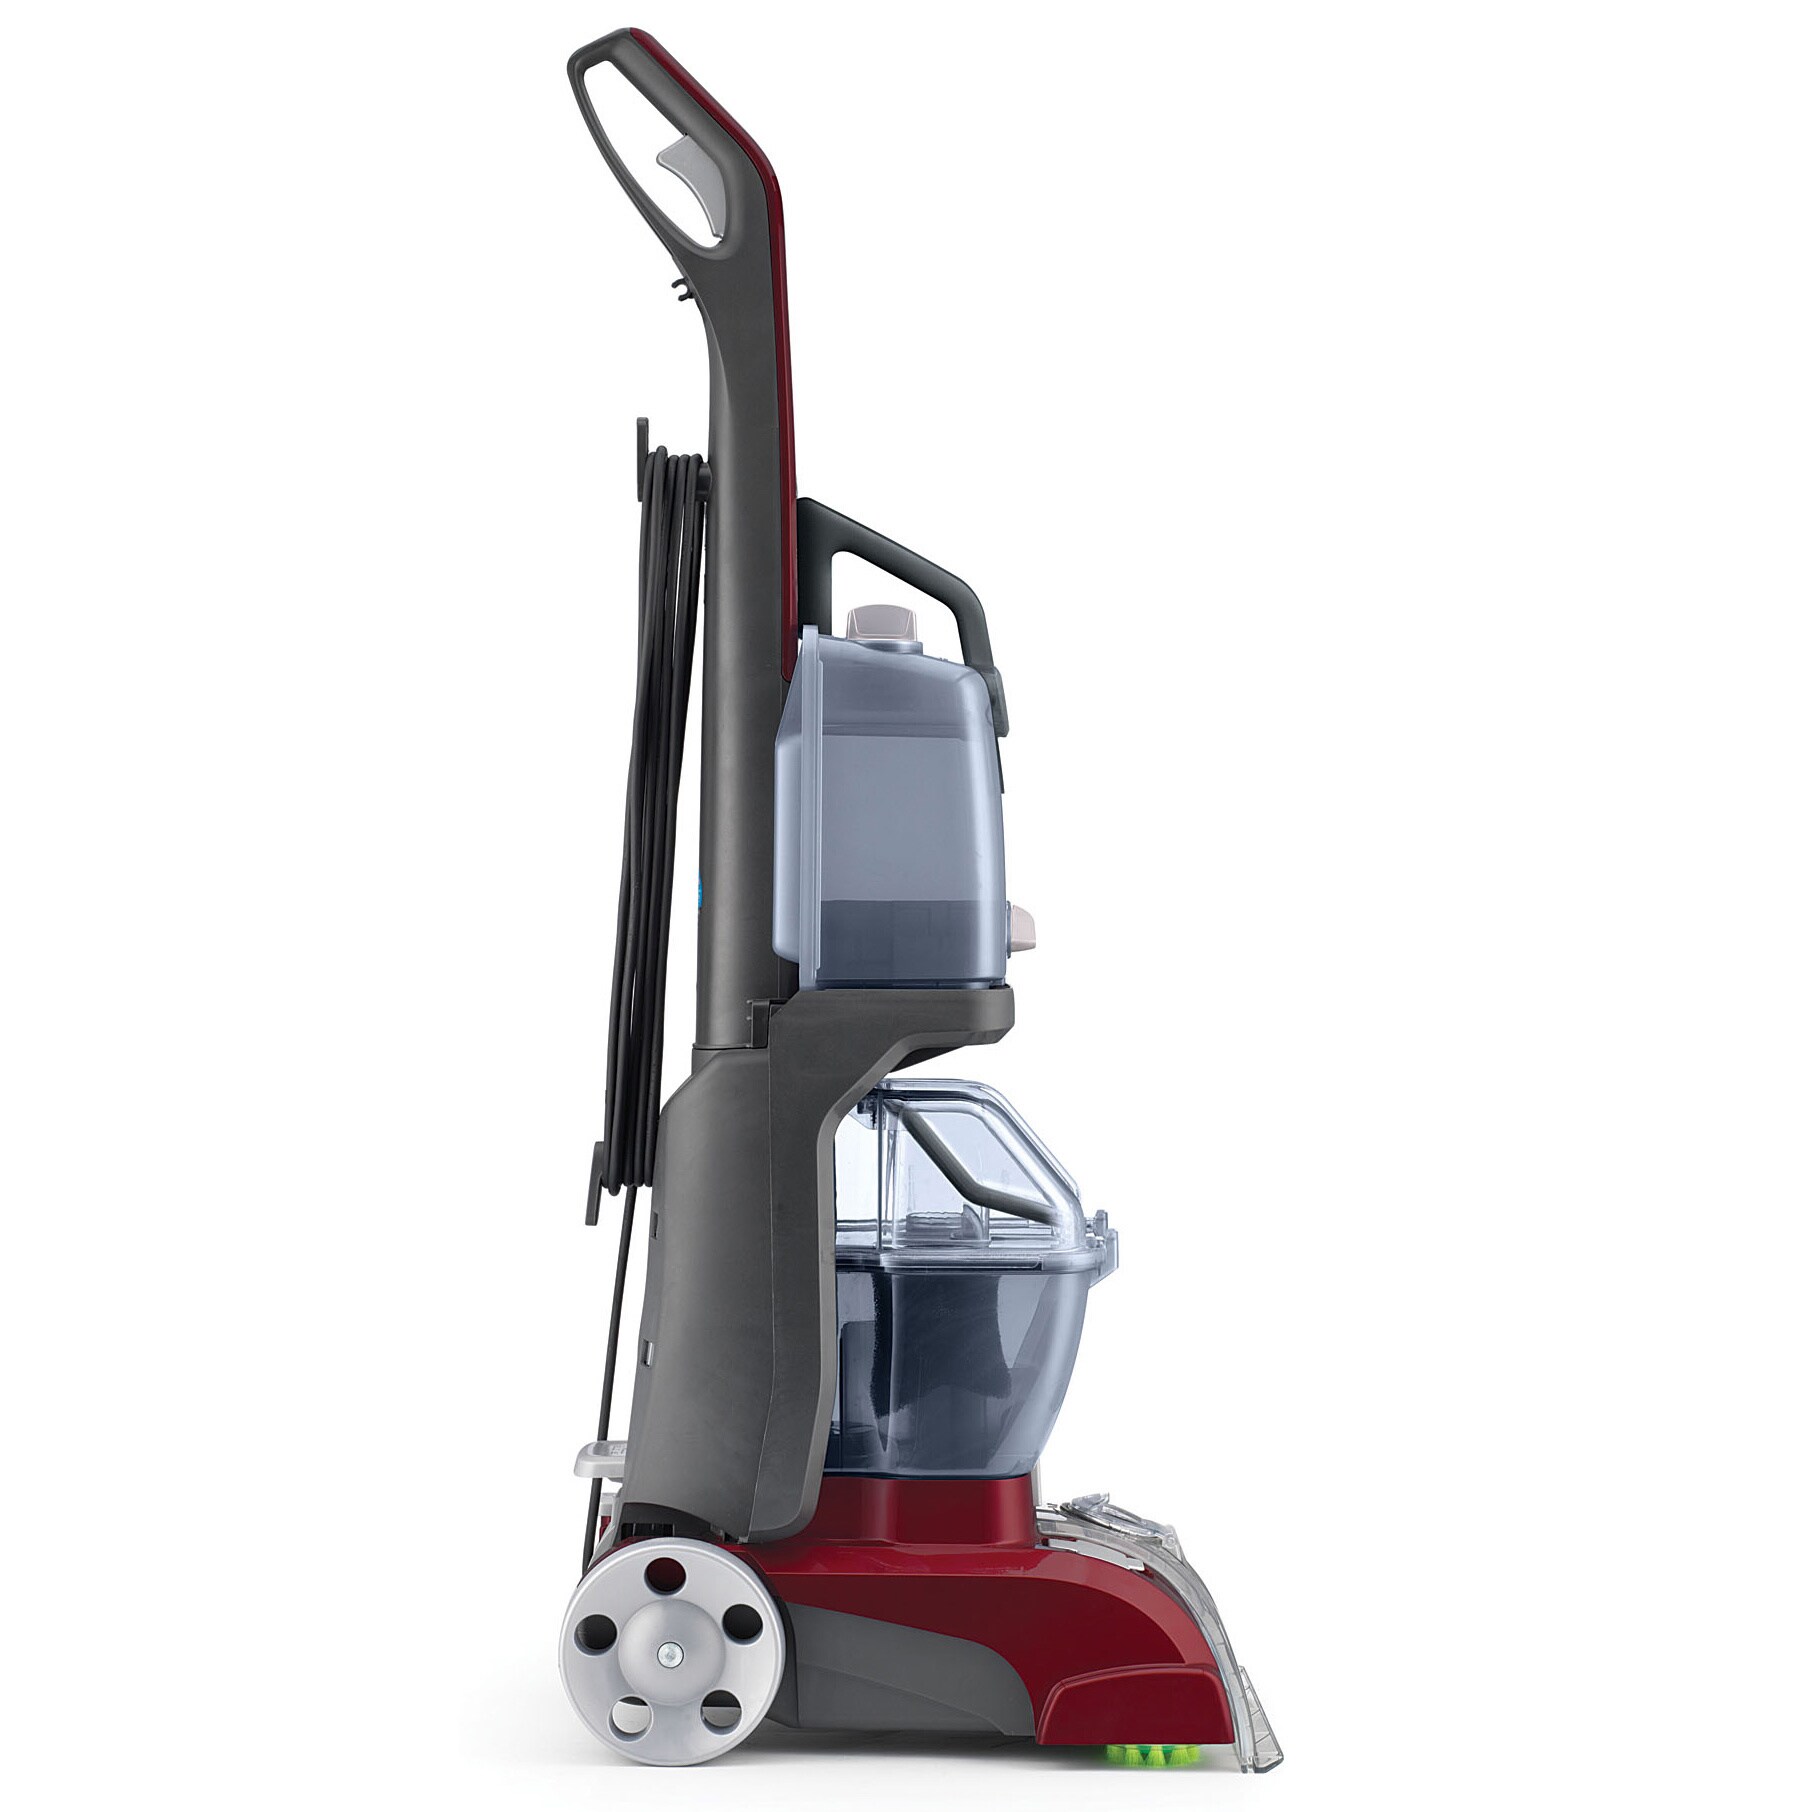 Hoover Power Scrub Carpet Cleaner Review